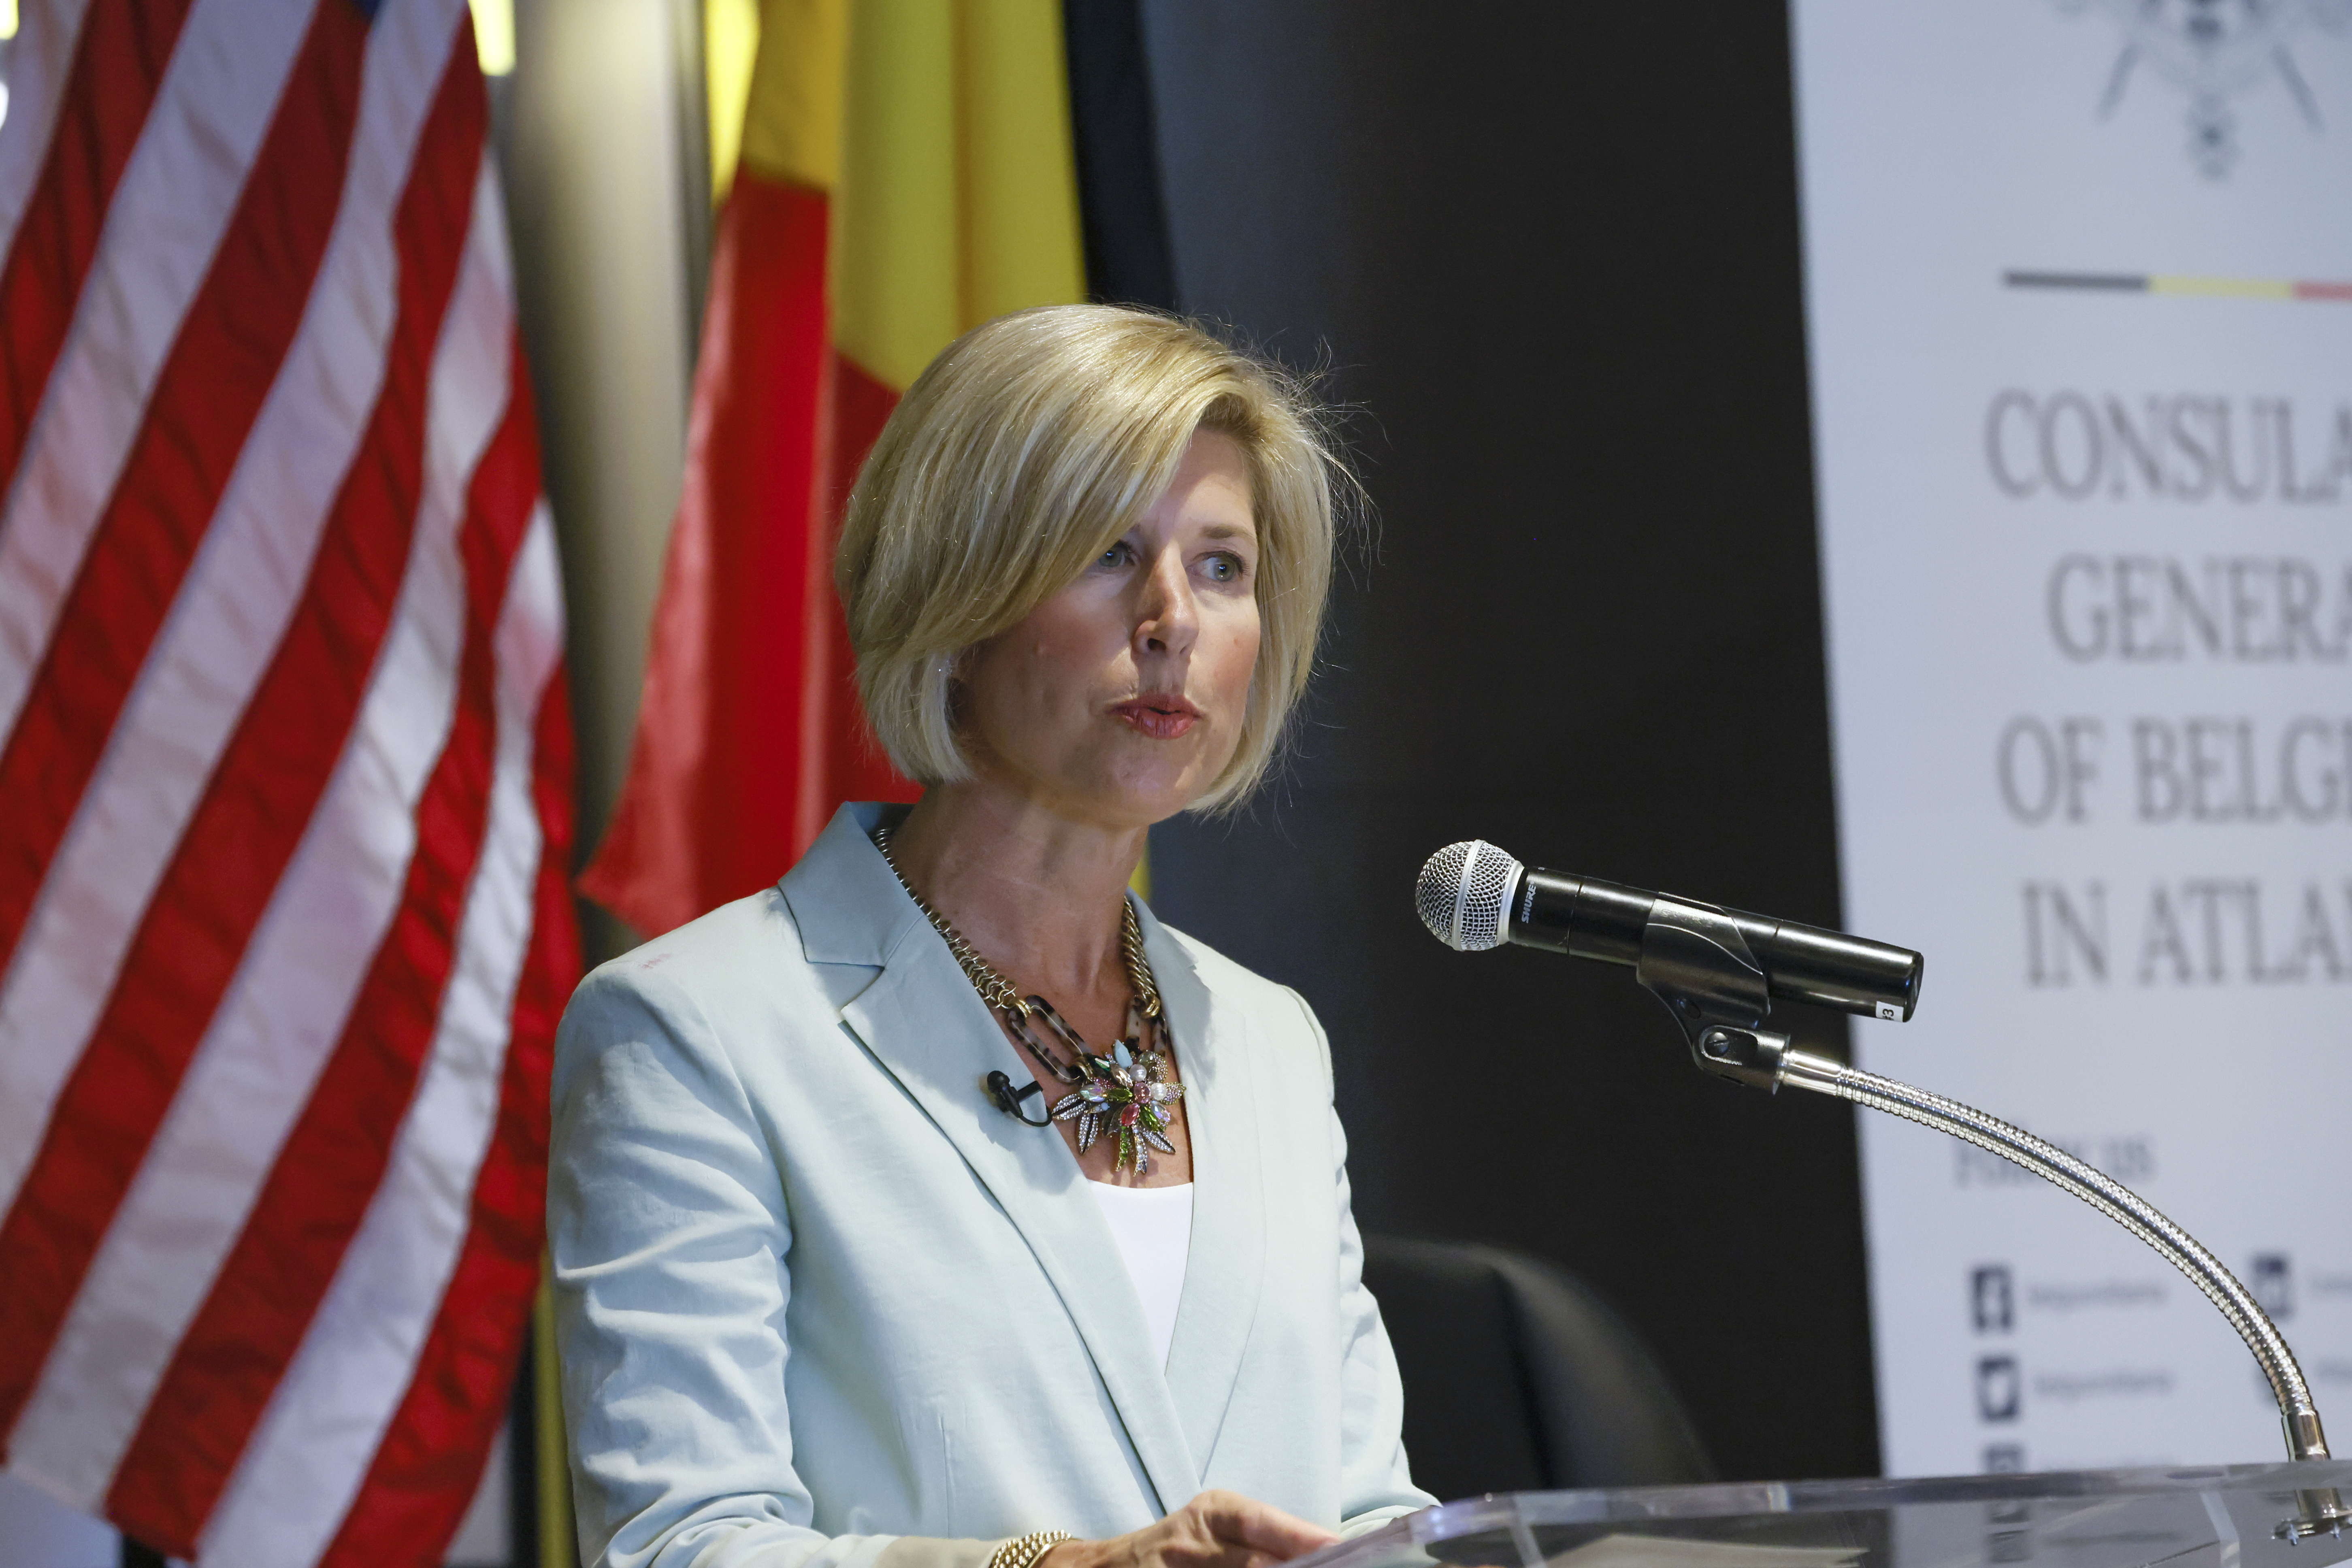 Metro Atlanta Chamber CEO Katie Kirkpatrick speaks at The National Center for Civil and Human Rights in Atlanta during an event on diversity, equity and inclusion on Monday, June 6, 2022. (Natrice Miller / natrice.miller@ajc.com)